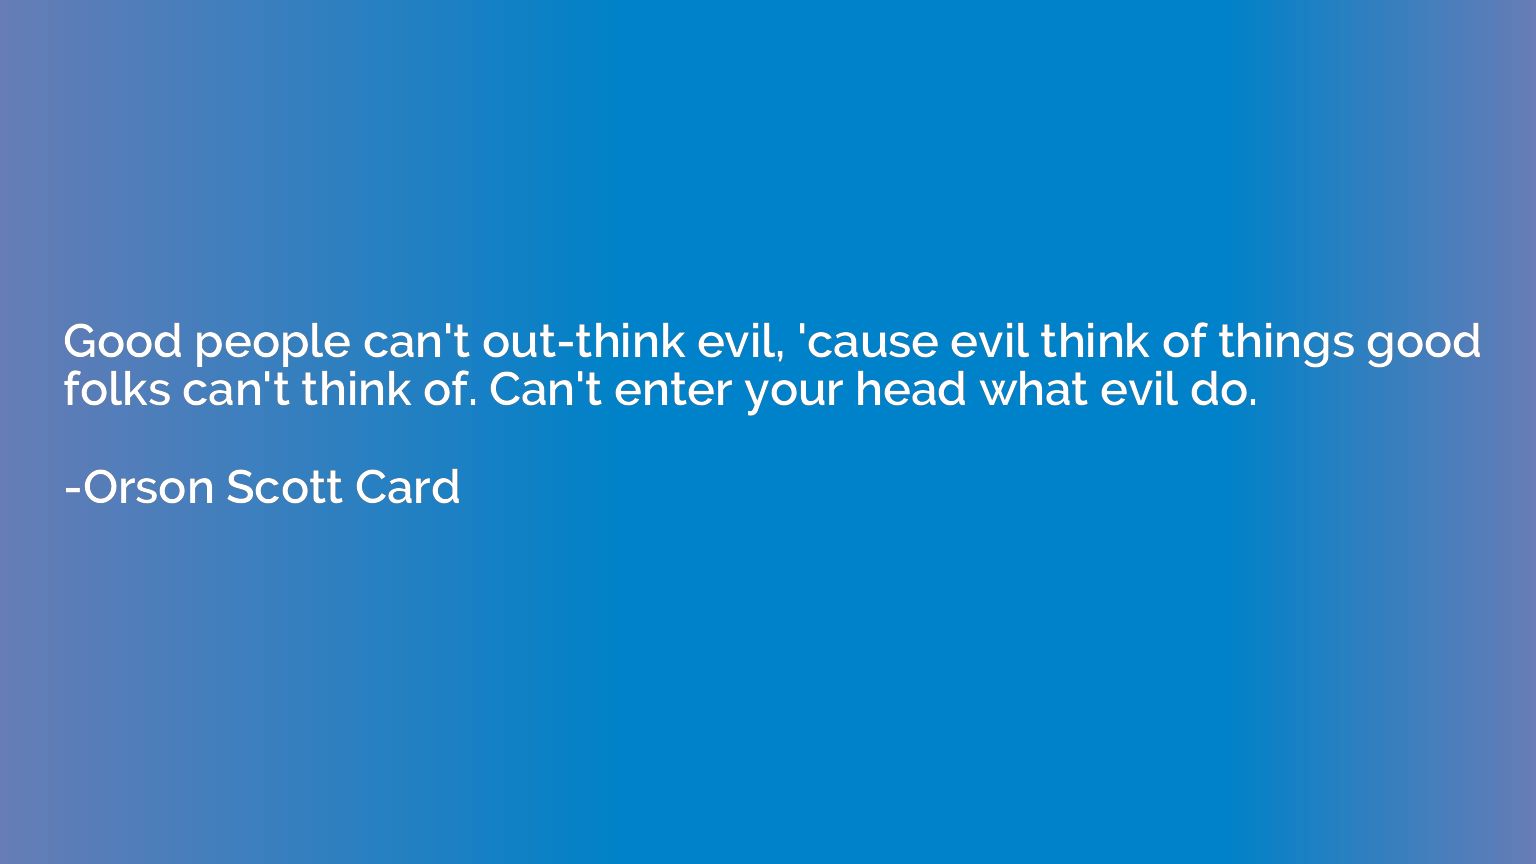 Good people can't out-think evil, 'cause evil think of thing